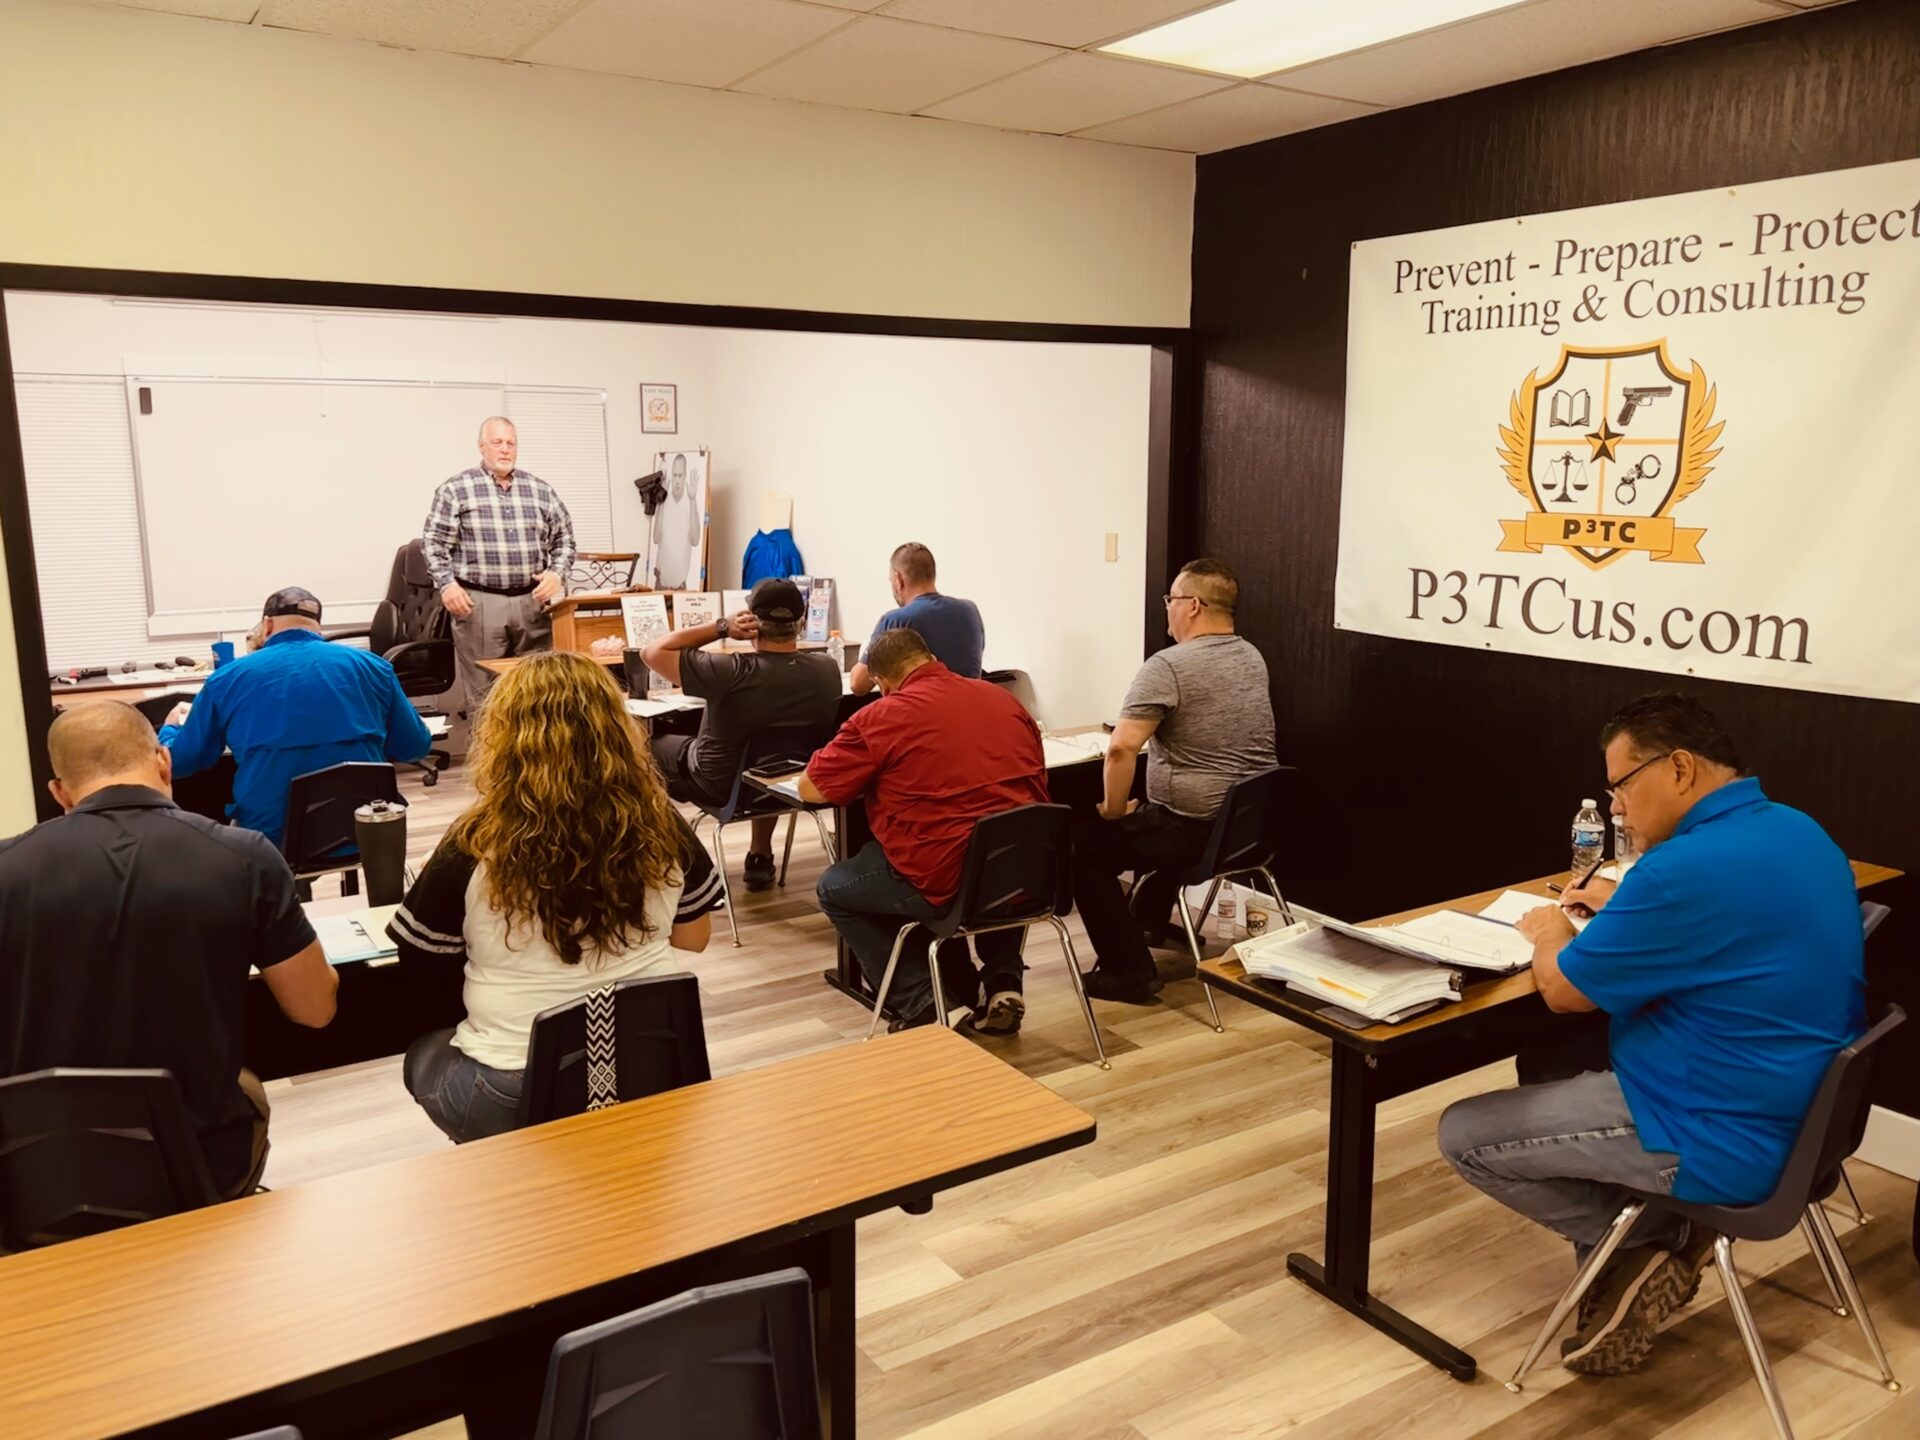 Ken Lewis formally of National Protective Services Institute NPSI Training instructing and class with Prevent Prepare Protect Training and Consultation P3TC